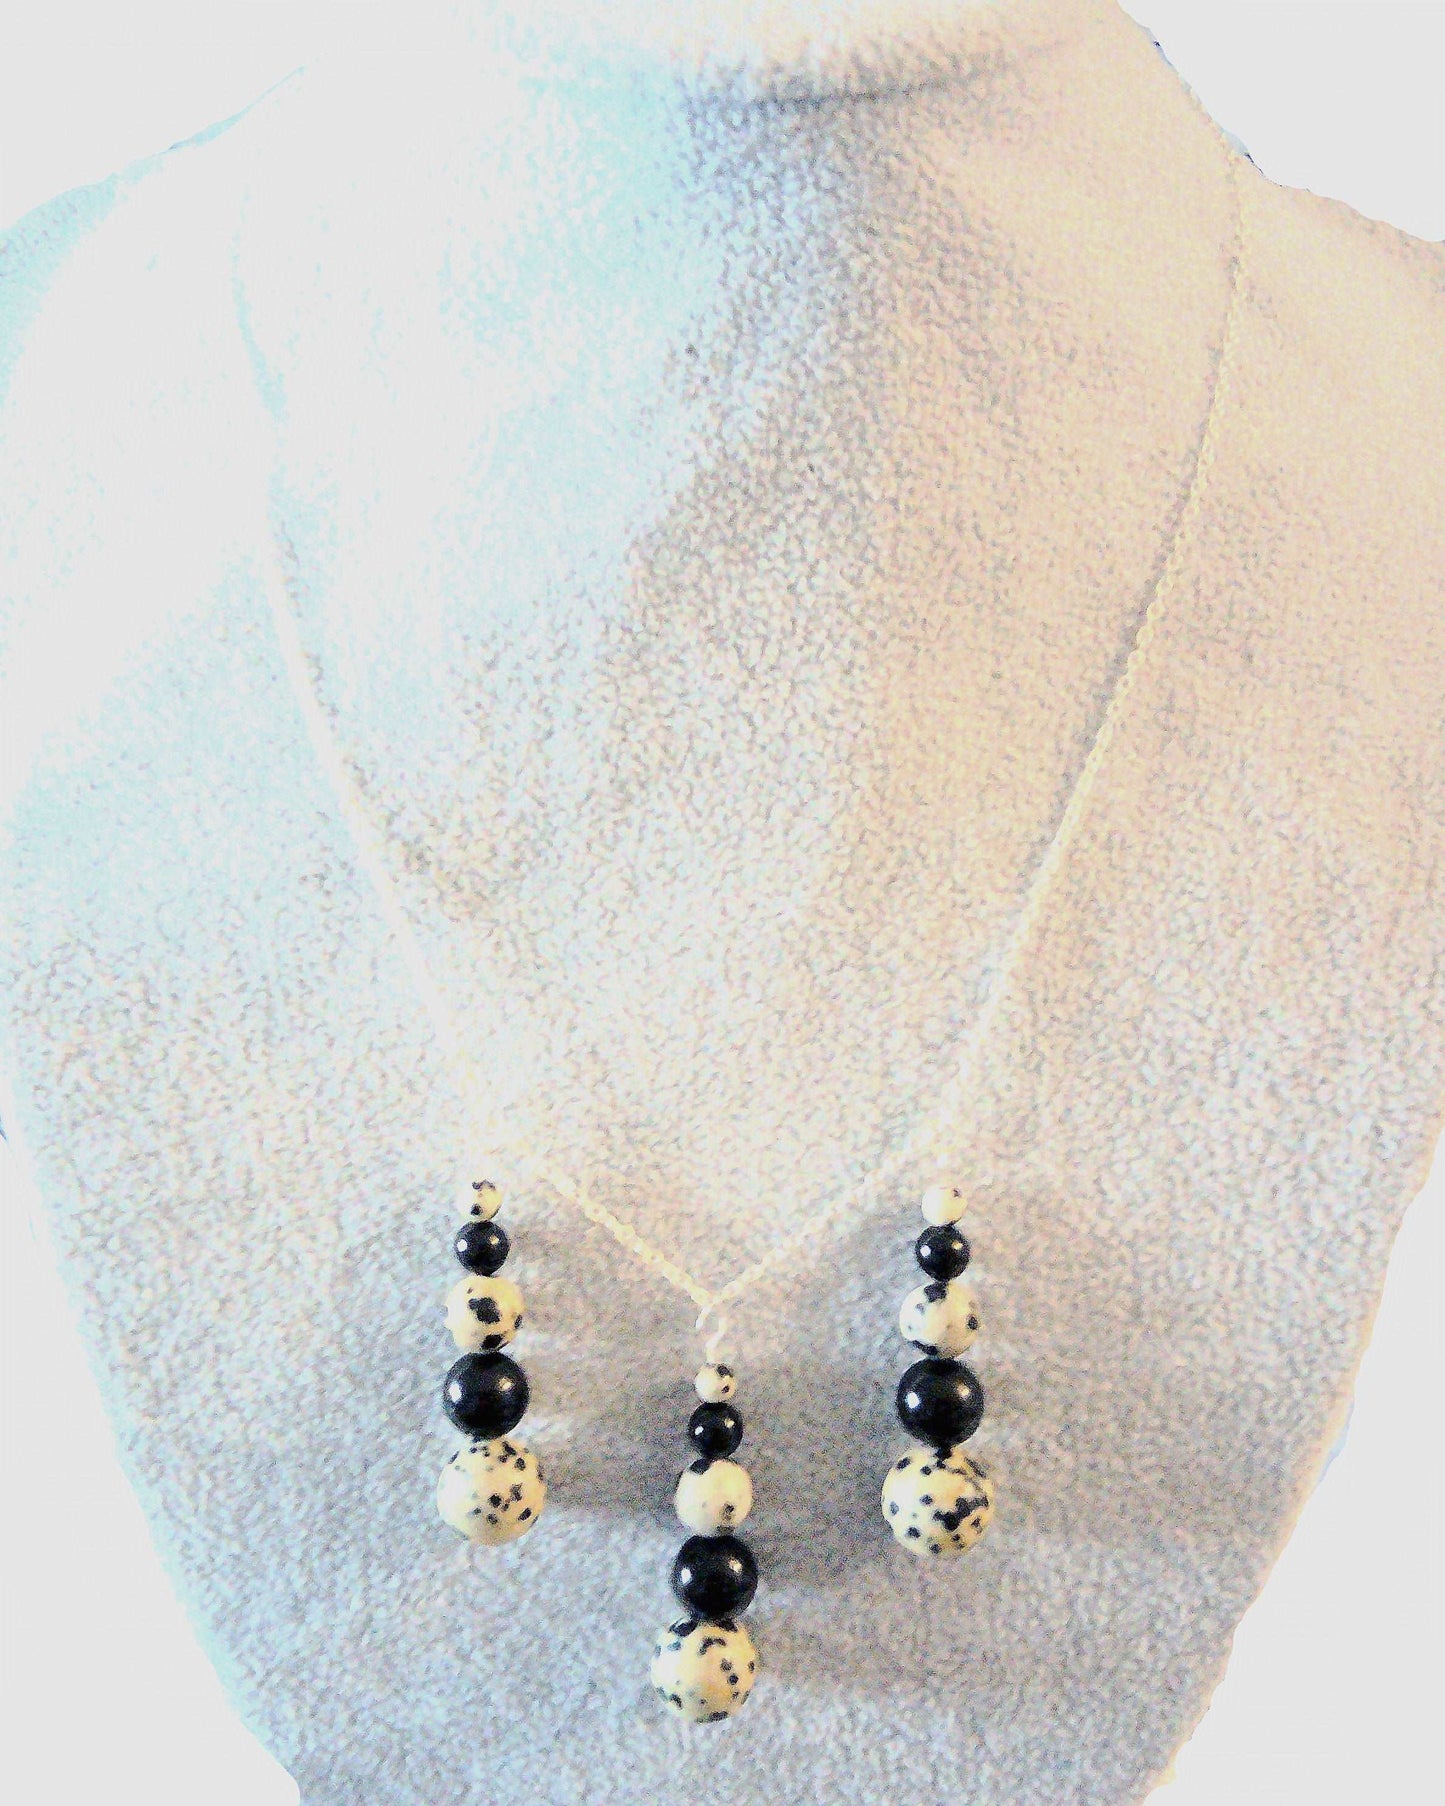 Genuine dalmation spot-black onyx beads with 100% .925 sterling silver necklace chain - Providence silver gold jewelry usa